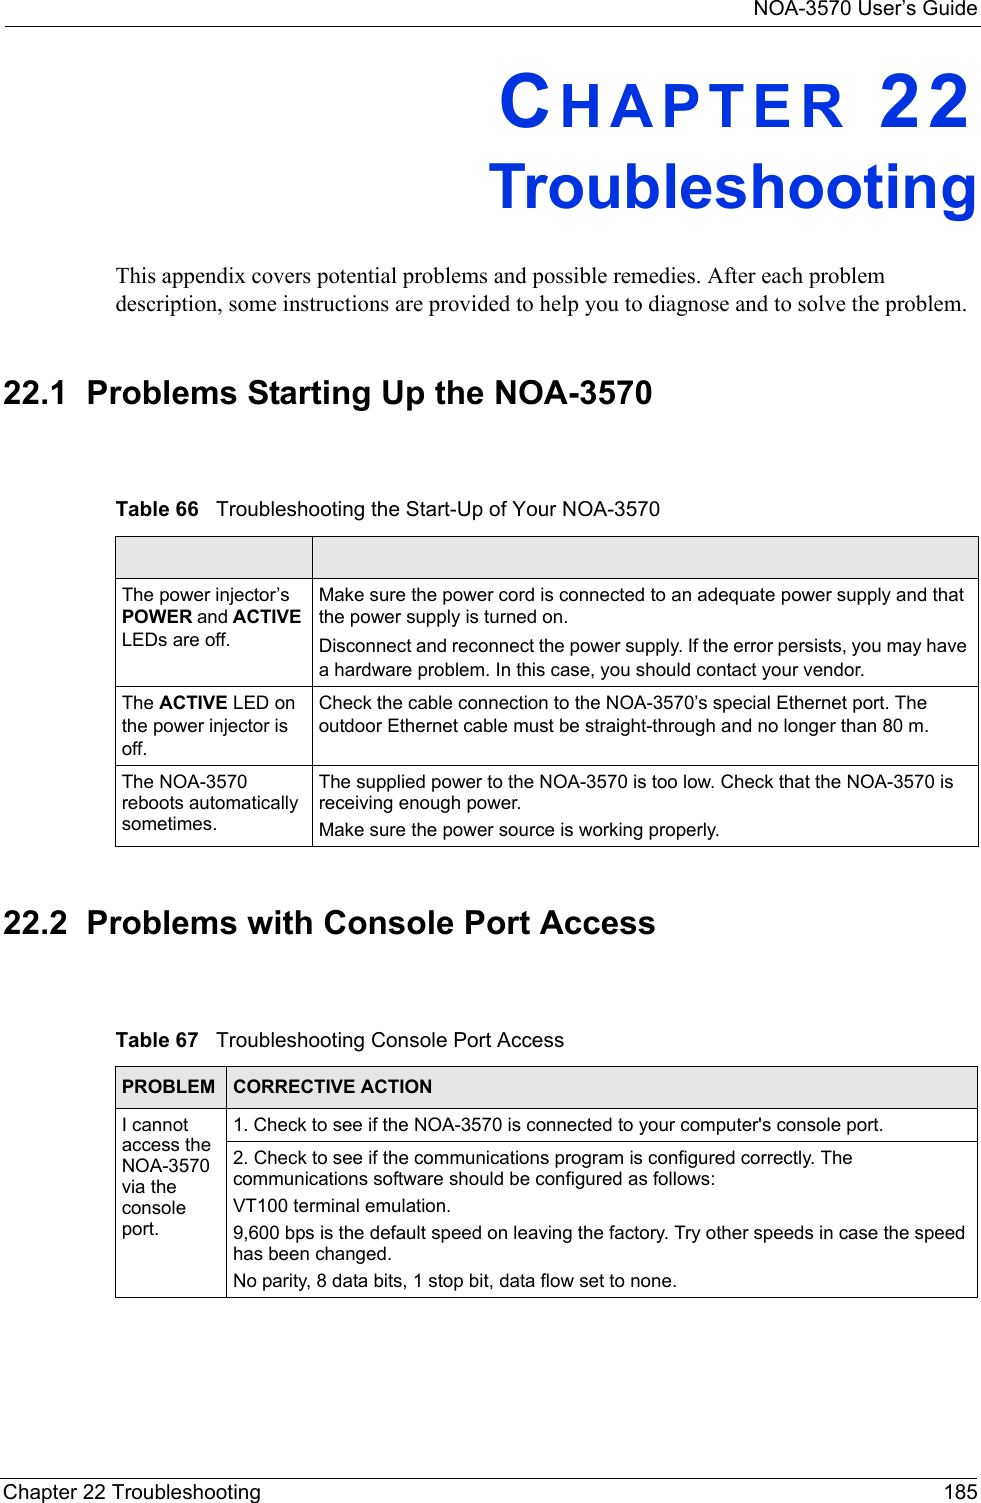 NOA-3570 User’s GuideChapter 22 Troubleshooting 185CHAPTER 22TroubleshootingThis appendix covers potential problems and possible remedies. After each problem description, some instructions are provided to help you to diagnose and to solve the problem.22.1  Problems Starting Up the NOA-357022.2  Problems with Console Port Access Table 66   Troubleshooting the Start-Up of Your NOA-3570The power injector’s  POWER and ACTIVE LEDs are off.Make sure the power cord is connected to an adequate power supply and that the power supply is turned on.Disconnect and reconnect the power supply. If the error persists, you may have a hardware problem. In this case, you should contact your vendor.The ACTIVE LED on the power injector is off.Check the cable connection to the NOA-3570’s special Ethernet port. The outdoor Ethernet cable must be straight-through and no longer than 80 m.The NOA-3570 reboots automatically sometimes.The supplied power to the NOA-3570 is too low. Check that the NOA-3570 is receiving enough power.Make sure the power source is working properly.Table 67   Troubleshooting Console Port AccessPROBLEM  CORRECTIVE ACTIONI cannot access the NOA-3570 via the console port.1. Check to see if the NOA-3570 is connected to your computer&apos;s console port.2. Check to see if the communications program is configured correctly. The communications software should be configured as follows:VT100 terminal emulation.9,600 bps is the default speed on leaving the factory. Try other speeds in case the speed has been changed.No parity, 8 data bits, 1 stop bit, data flow set to none.